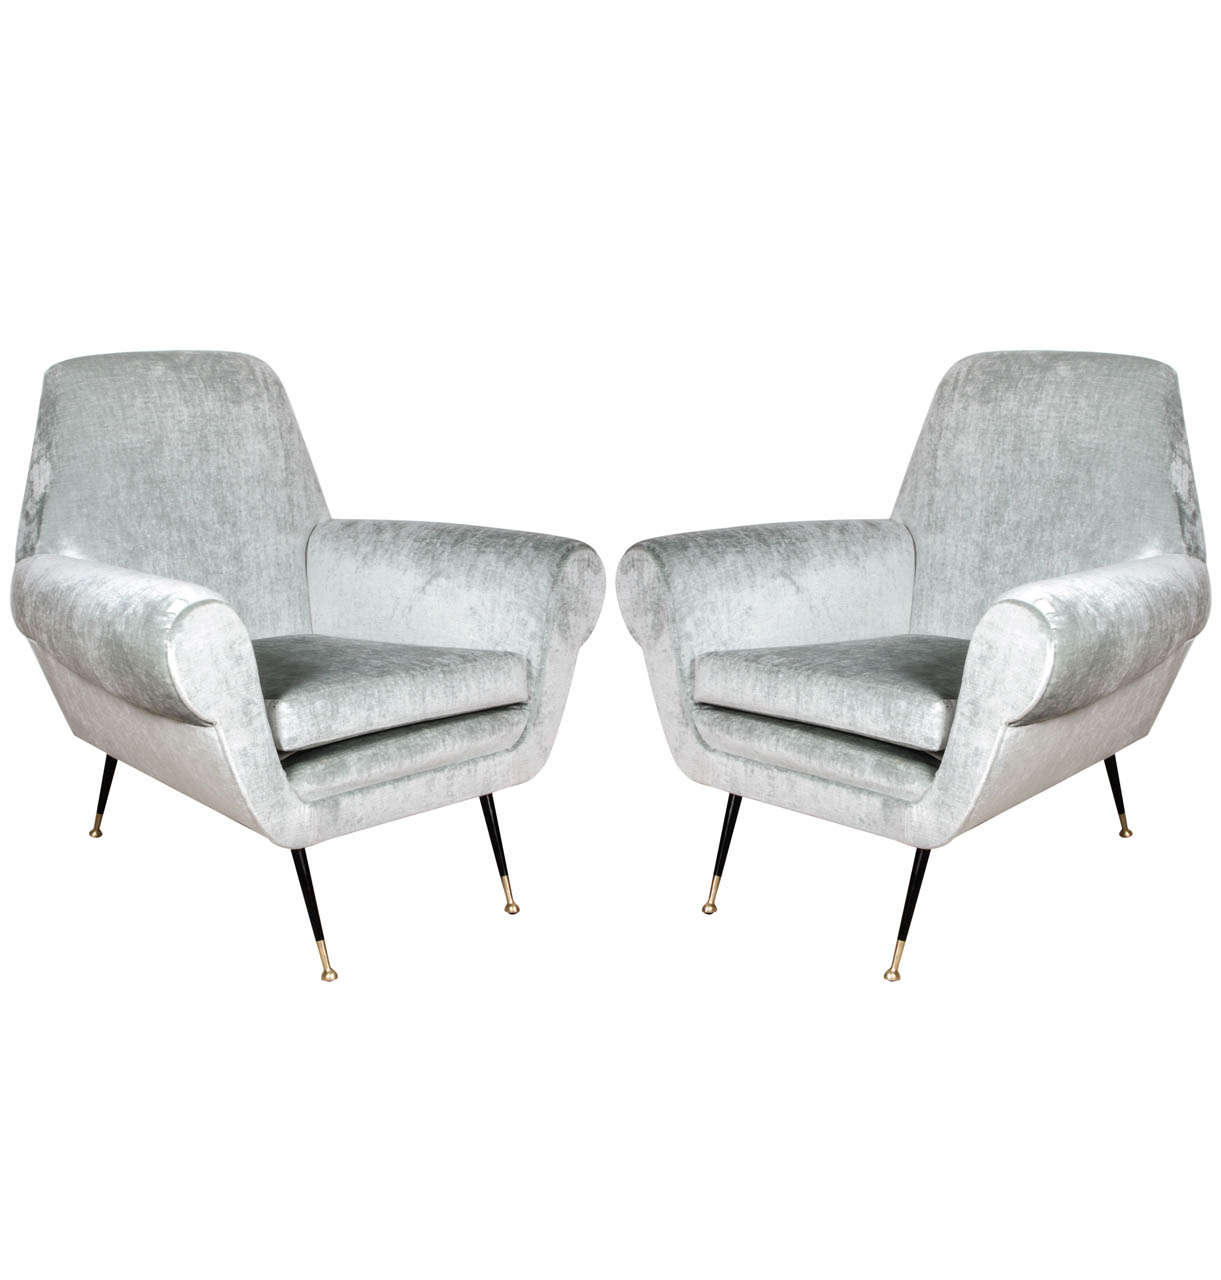 Architectural Mid-Century Pair of Chairs